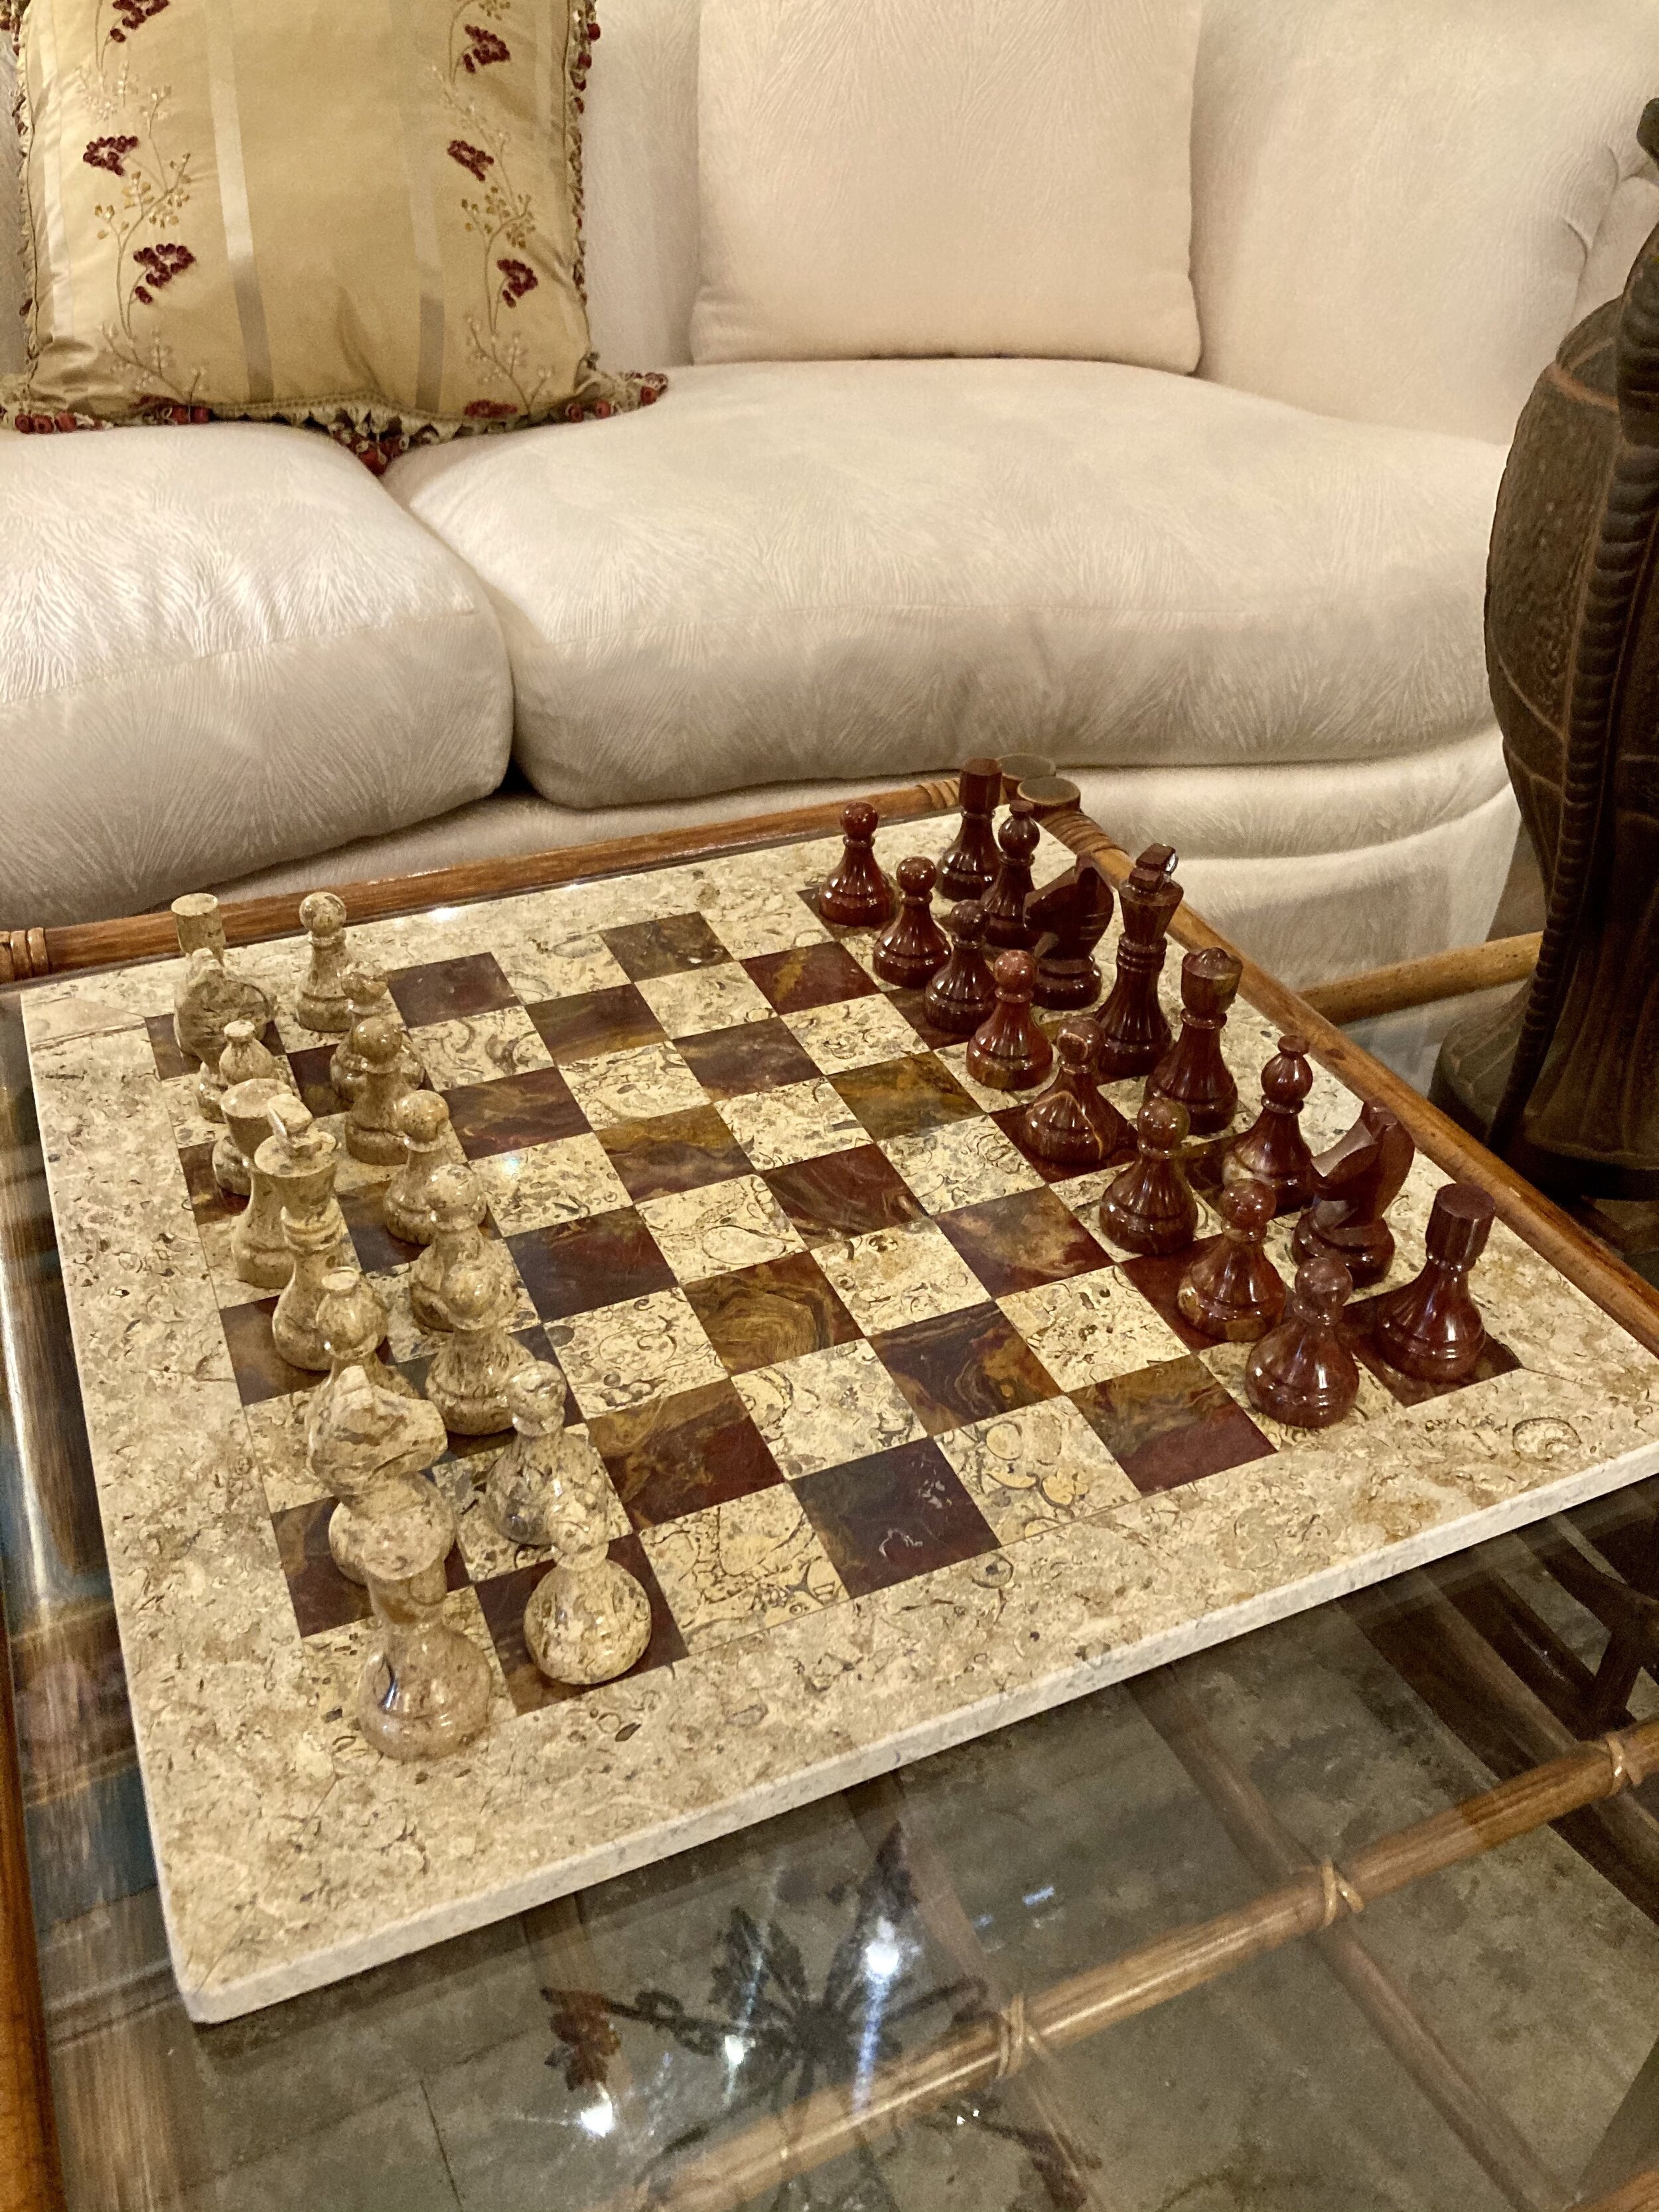 Fossil and Stone Chess Board Game